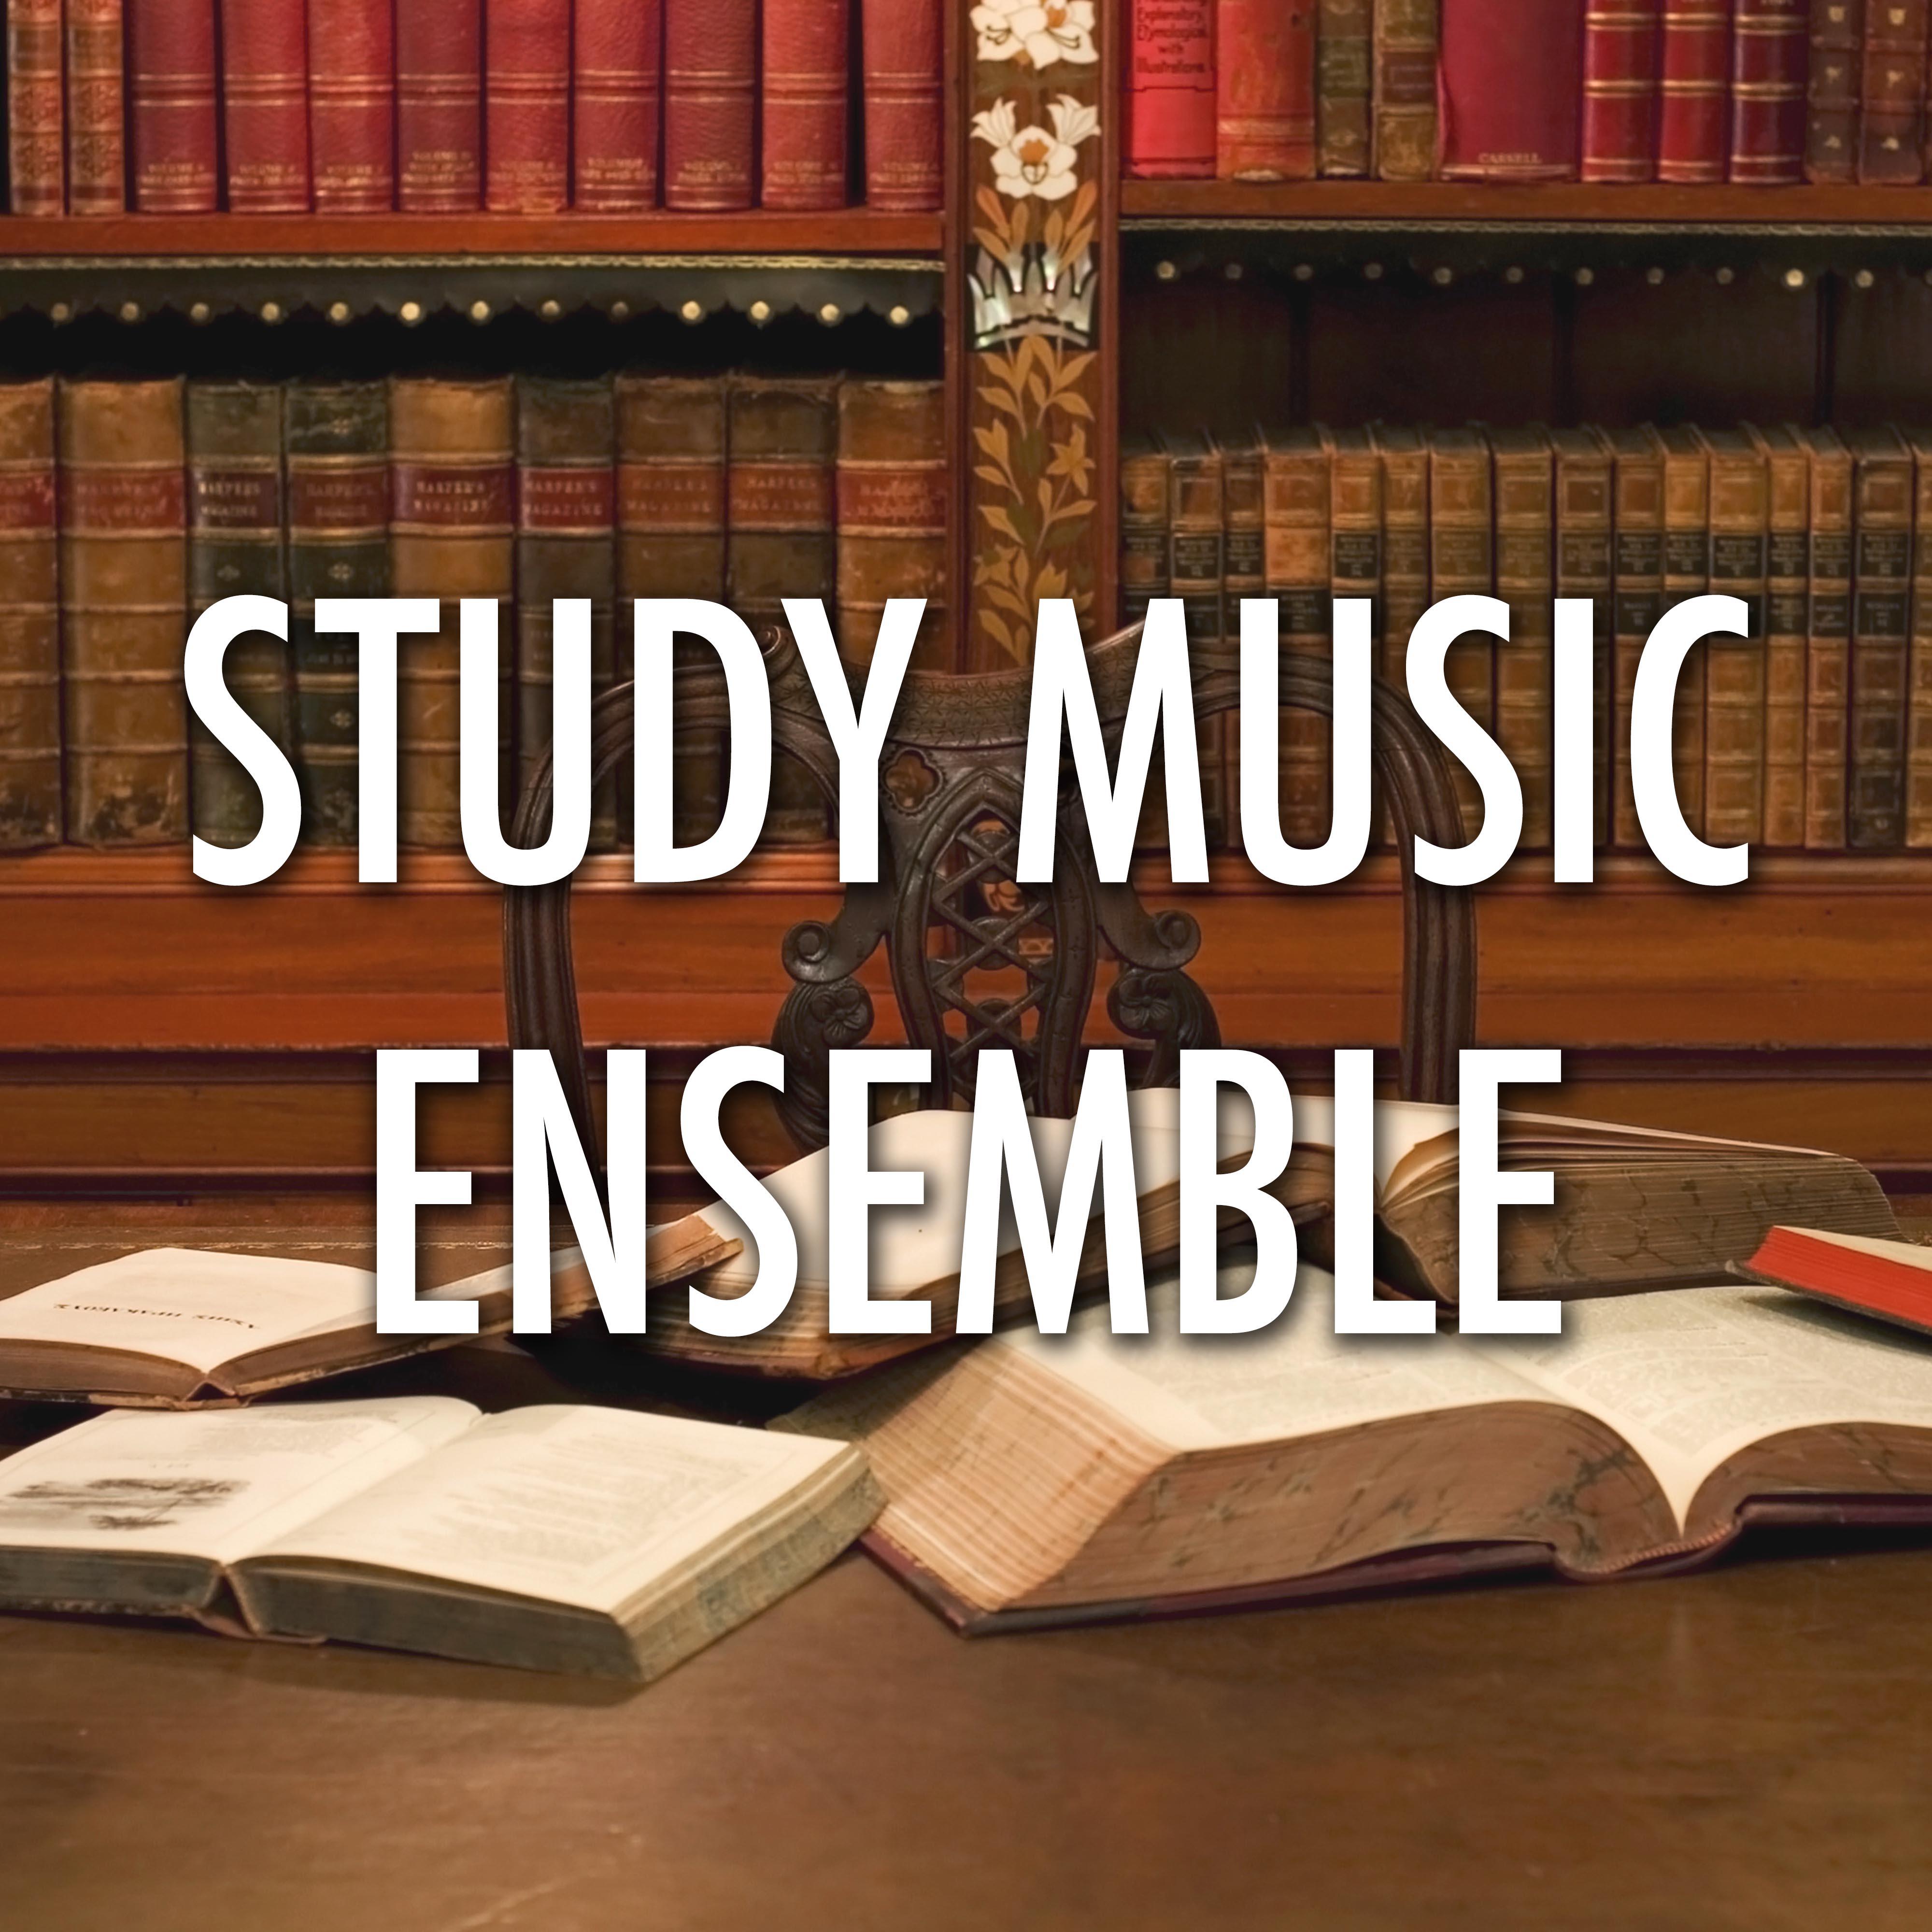 Study Music Ensemble - Essential New Age Background Music while Studying for Finals to improve Memory, Concentration and Focus